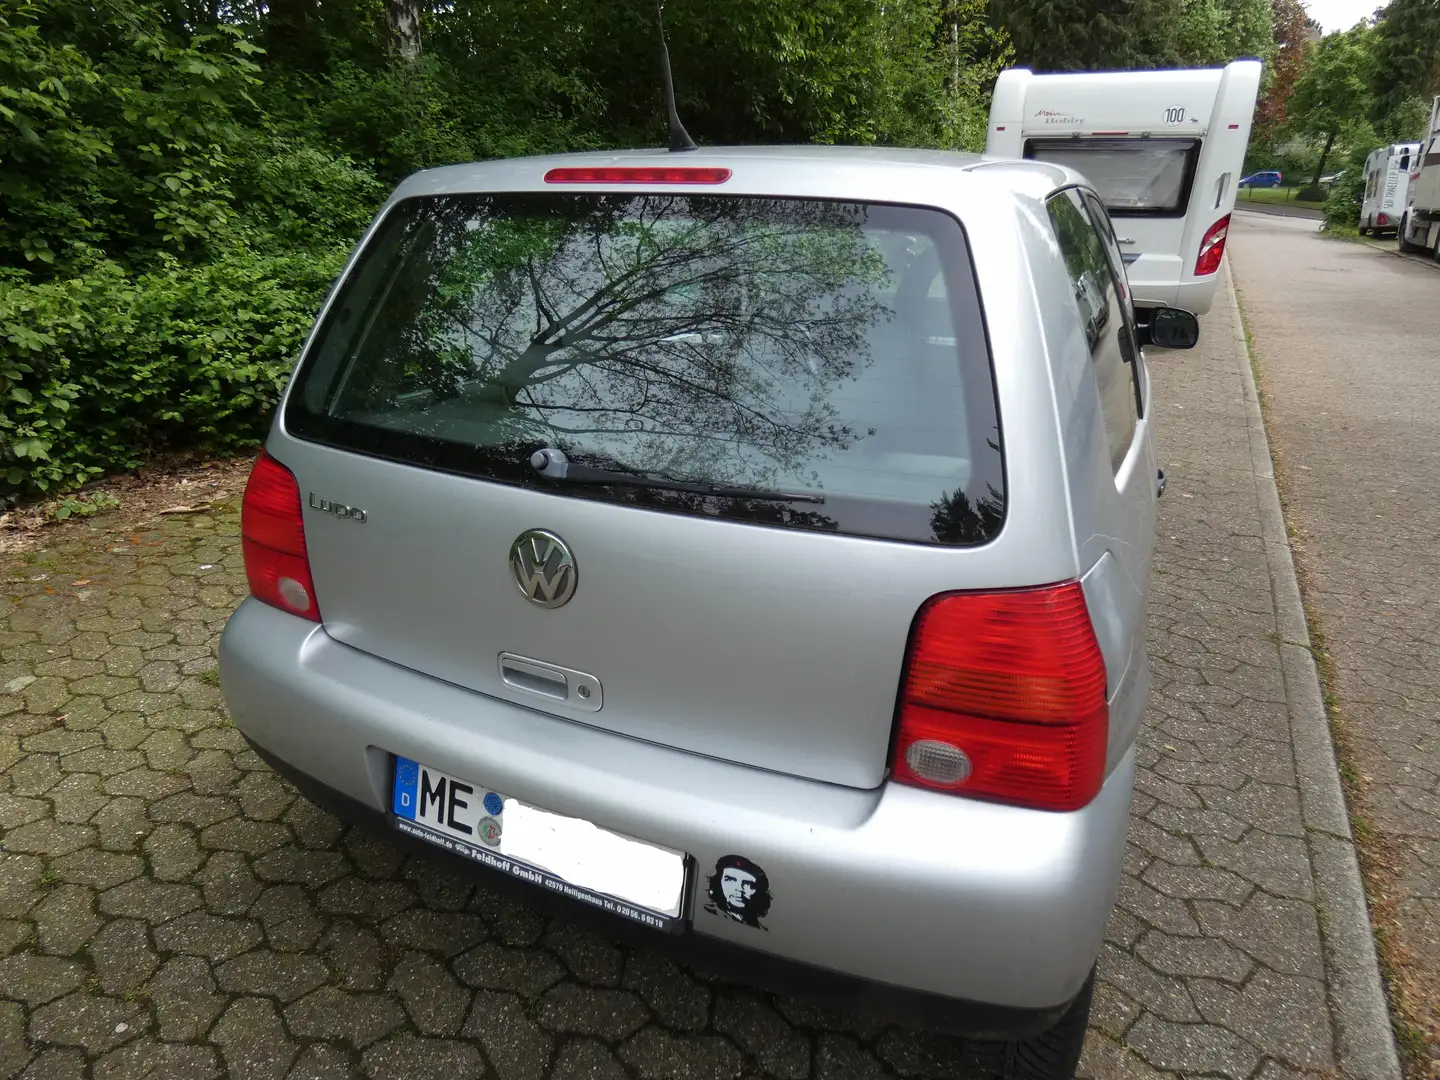 Volkswagen Lupo Lupo 1.4 - 1